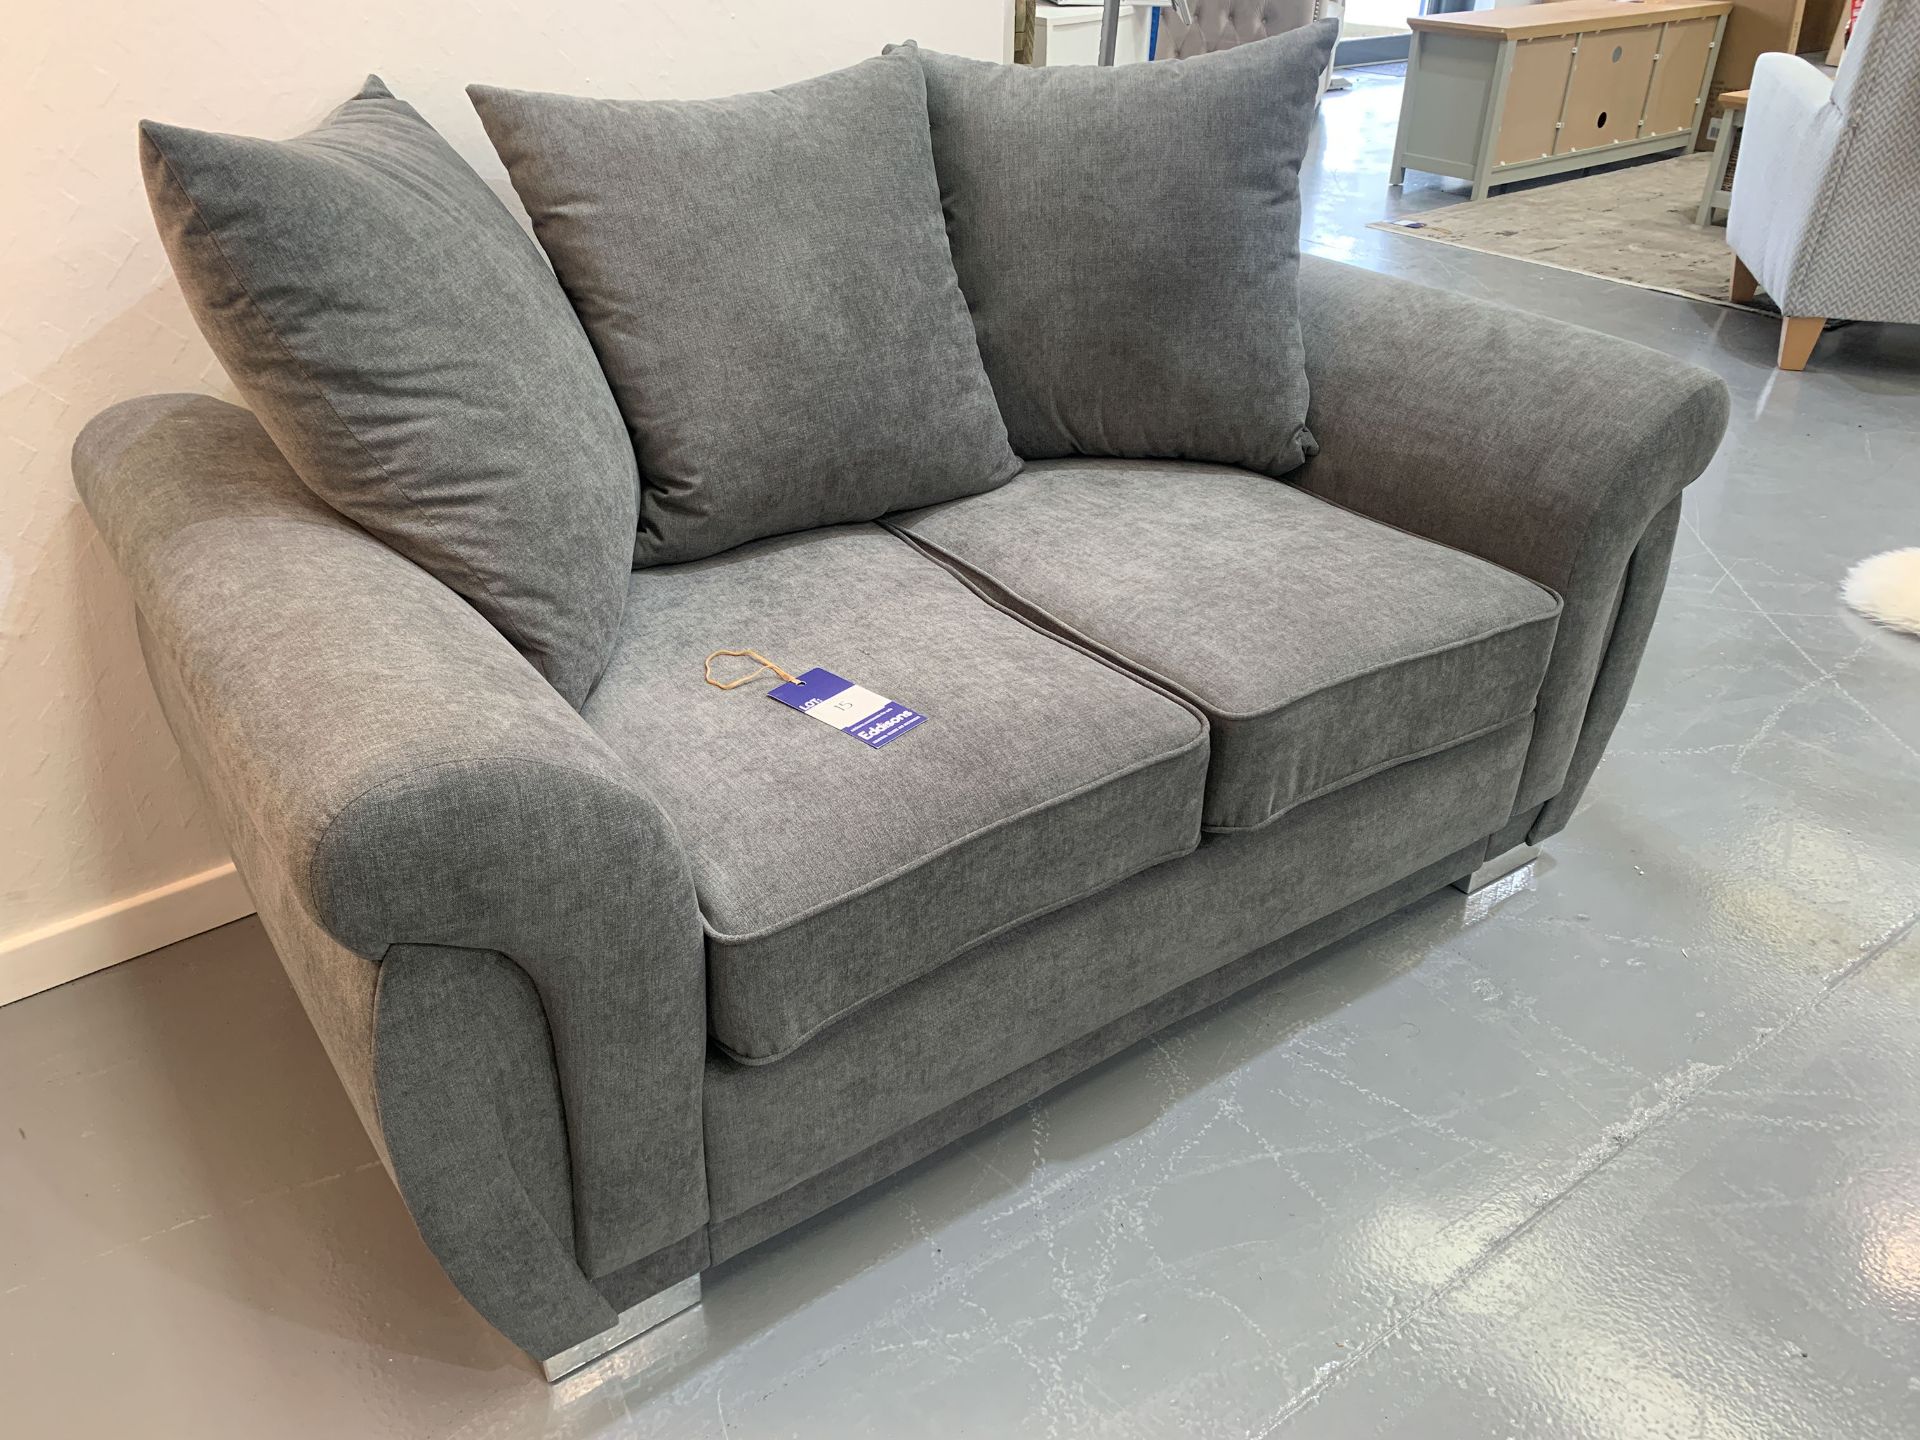 Scatterback Grey 2-Seat Sofa with Chrome Feet - Image 3 of 4